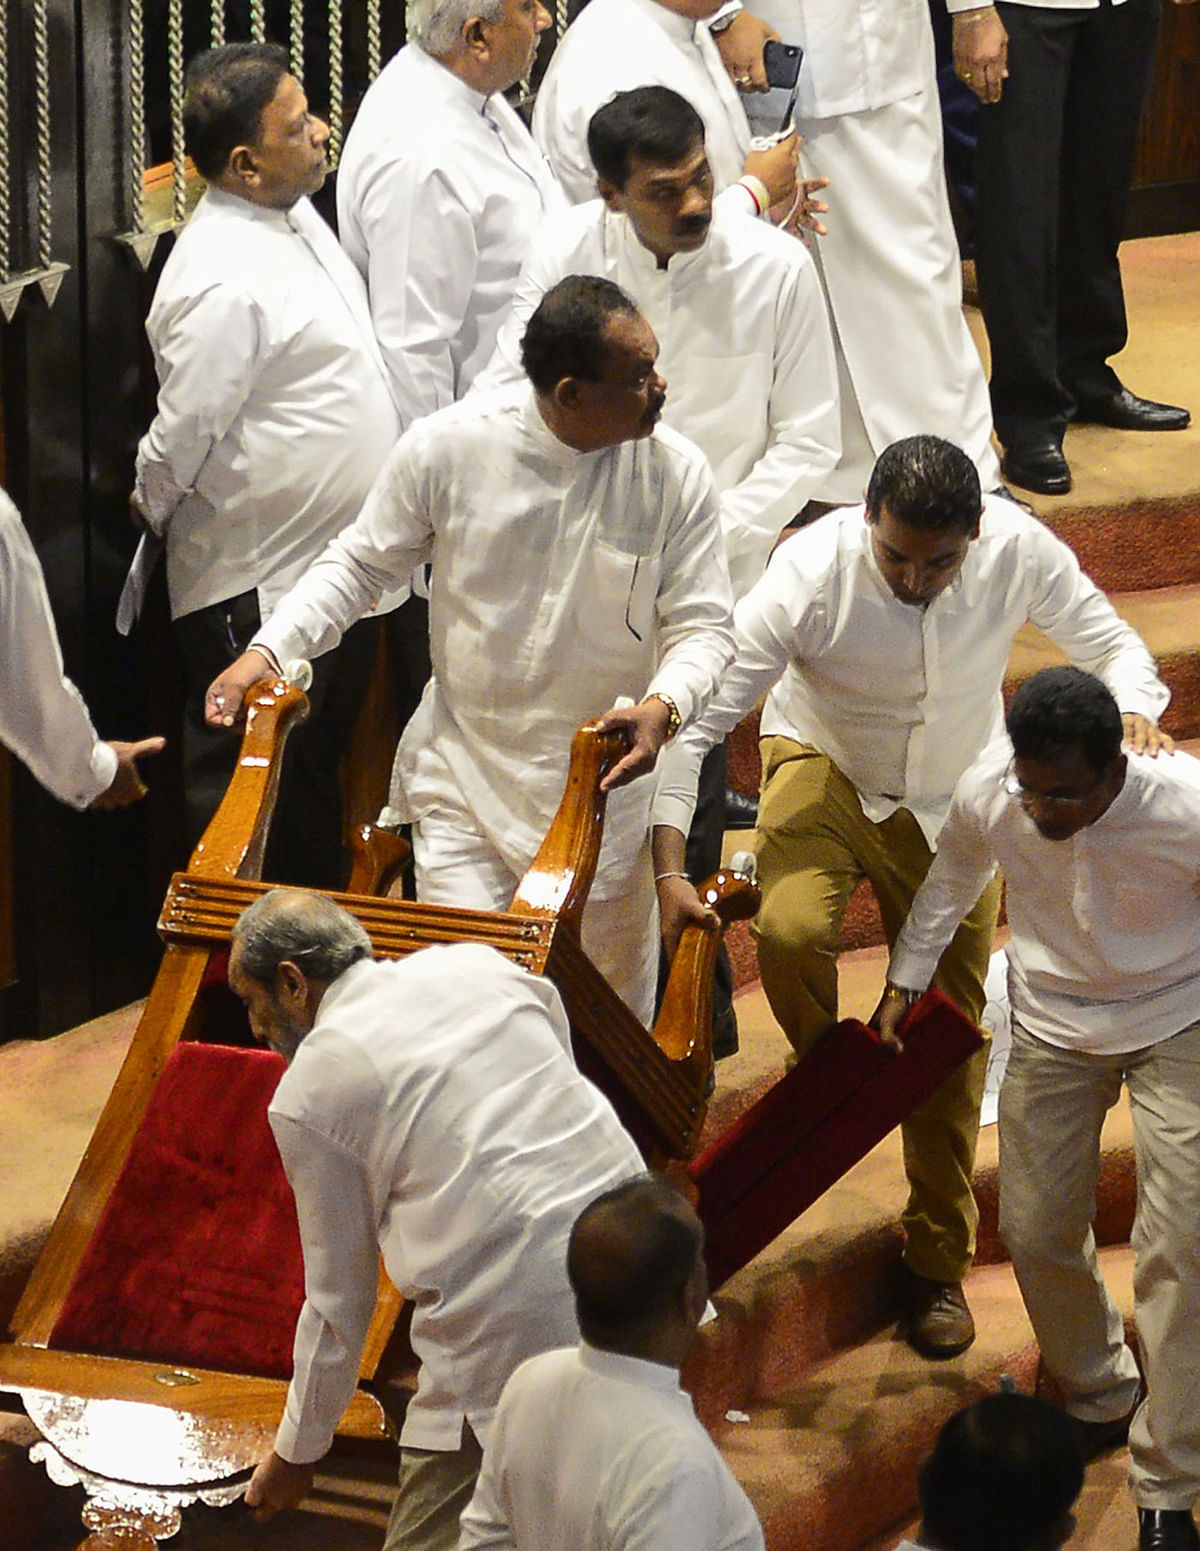 Members of the Sri Lankan parliament backing former president and currently appointed prime minister Mahinda Rajapakse drag away the parliament speaker`s chair in Colombo on 16 November, 2018. Photo: AFP